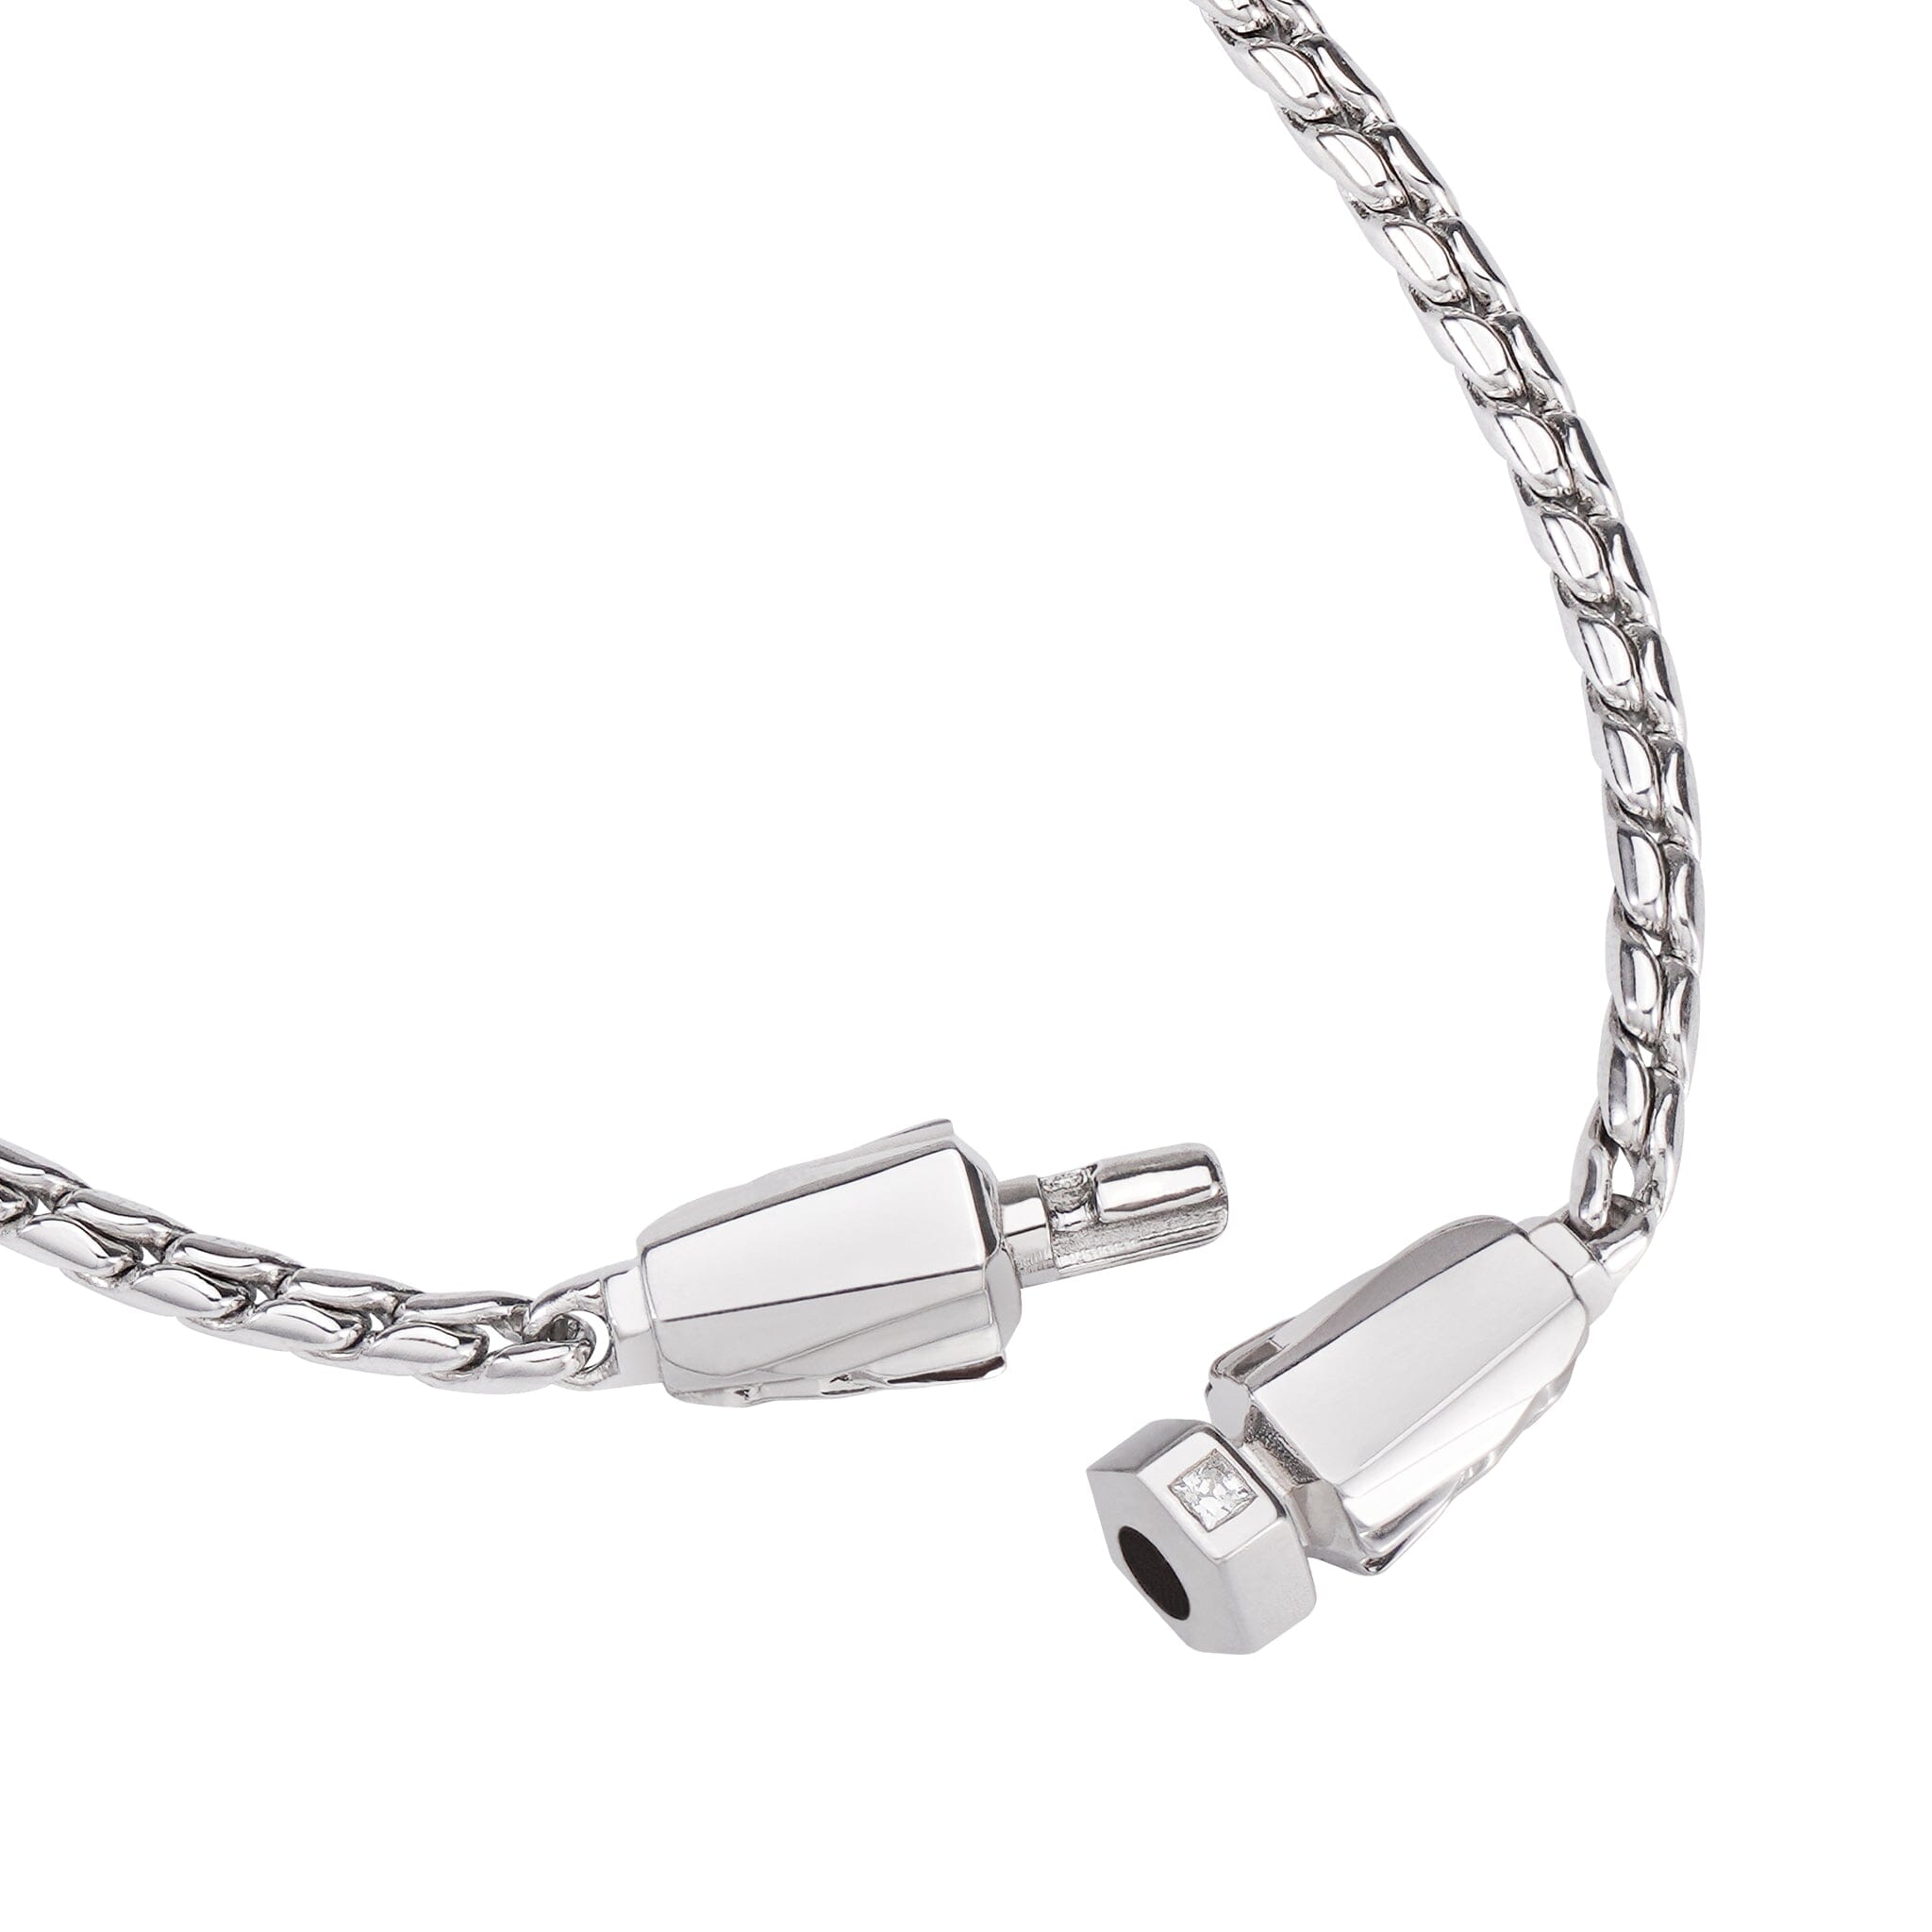 Men's Silver Chain with Feather Clasp Chains WAA FASHION GROUP 